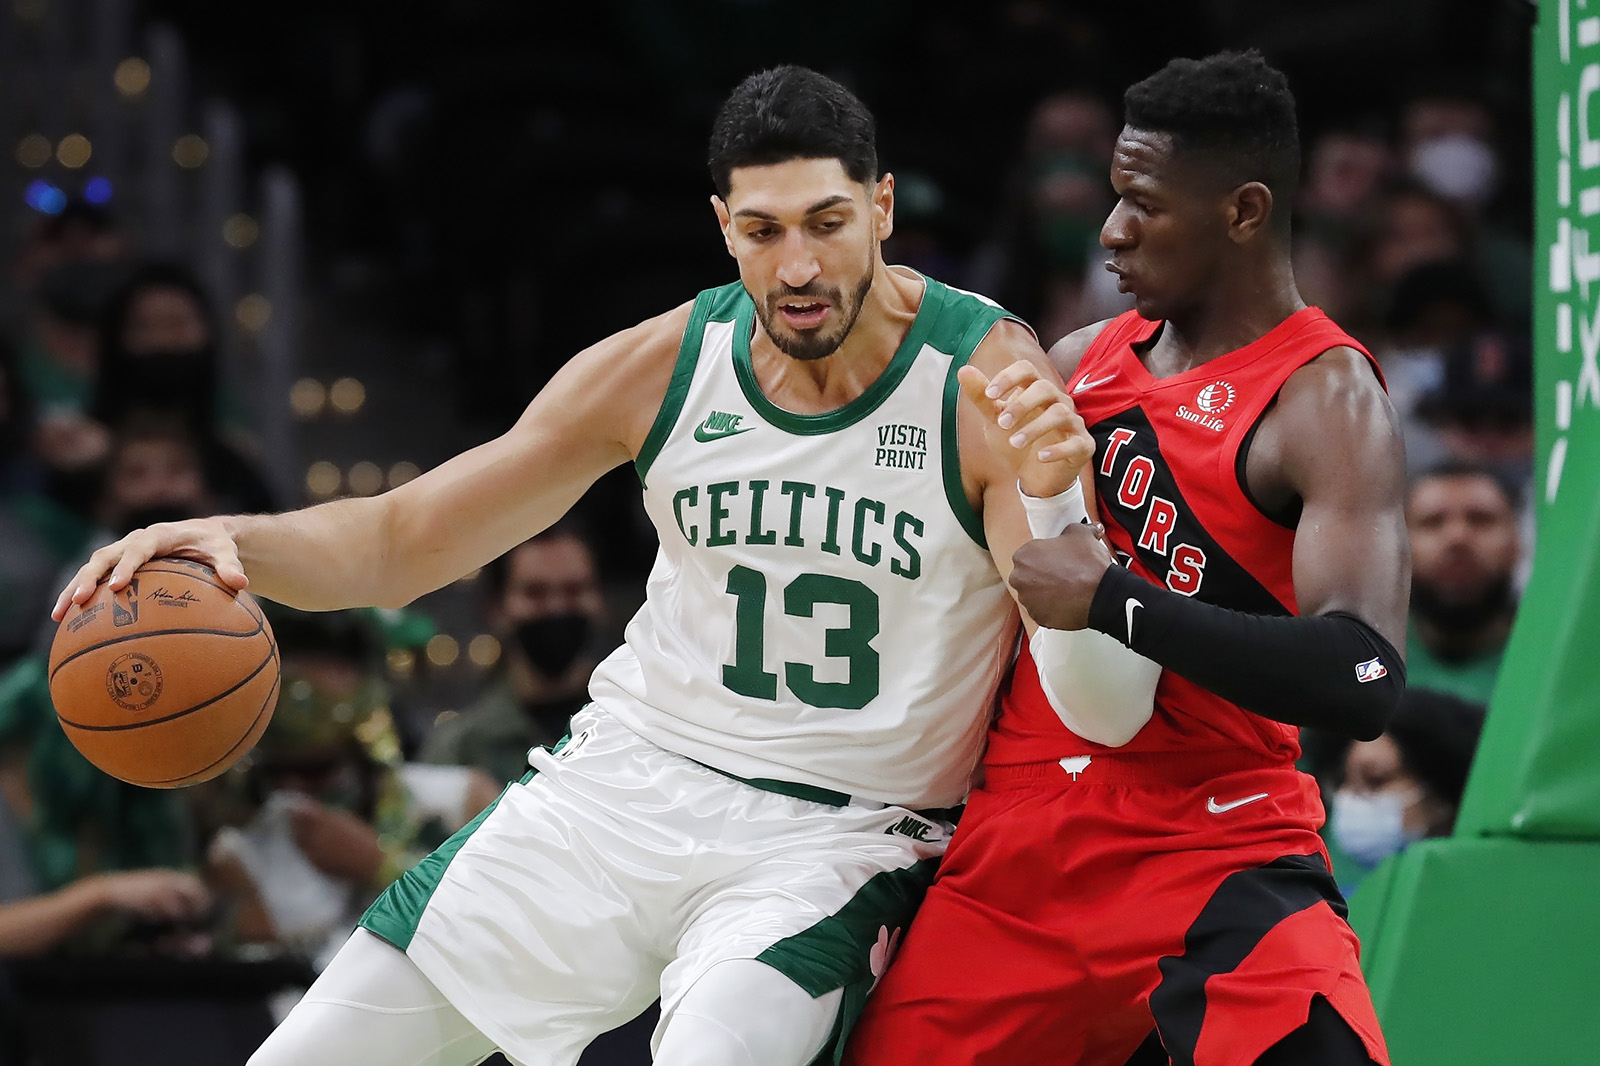 Boston Celtics' Enes Kanter (13) moves against Toronto Raptors' Isaac Bonga during the second half of an NBA basketball game, Friday, Oct. 22, 2021, in Boston. (AP Photo/Michael Dwyer)